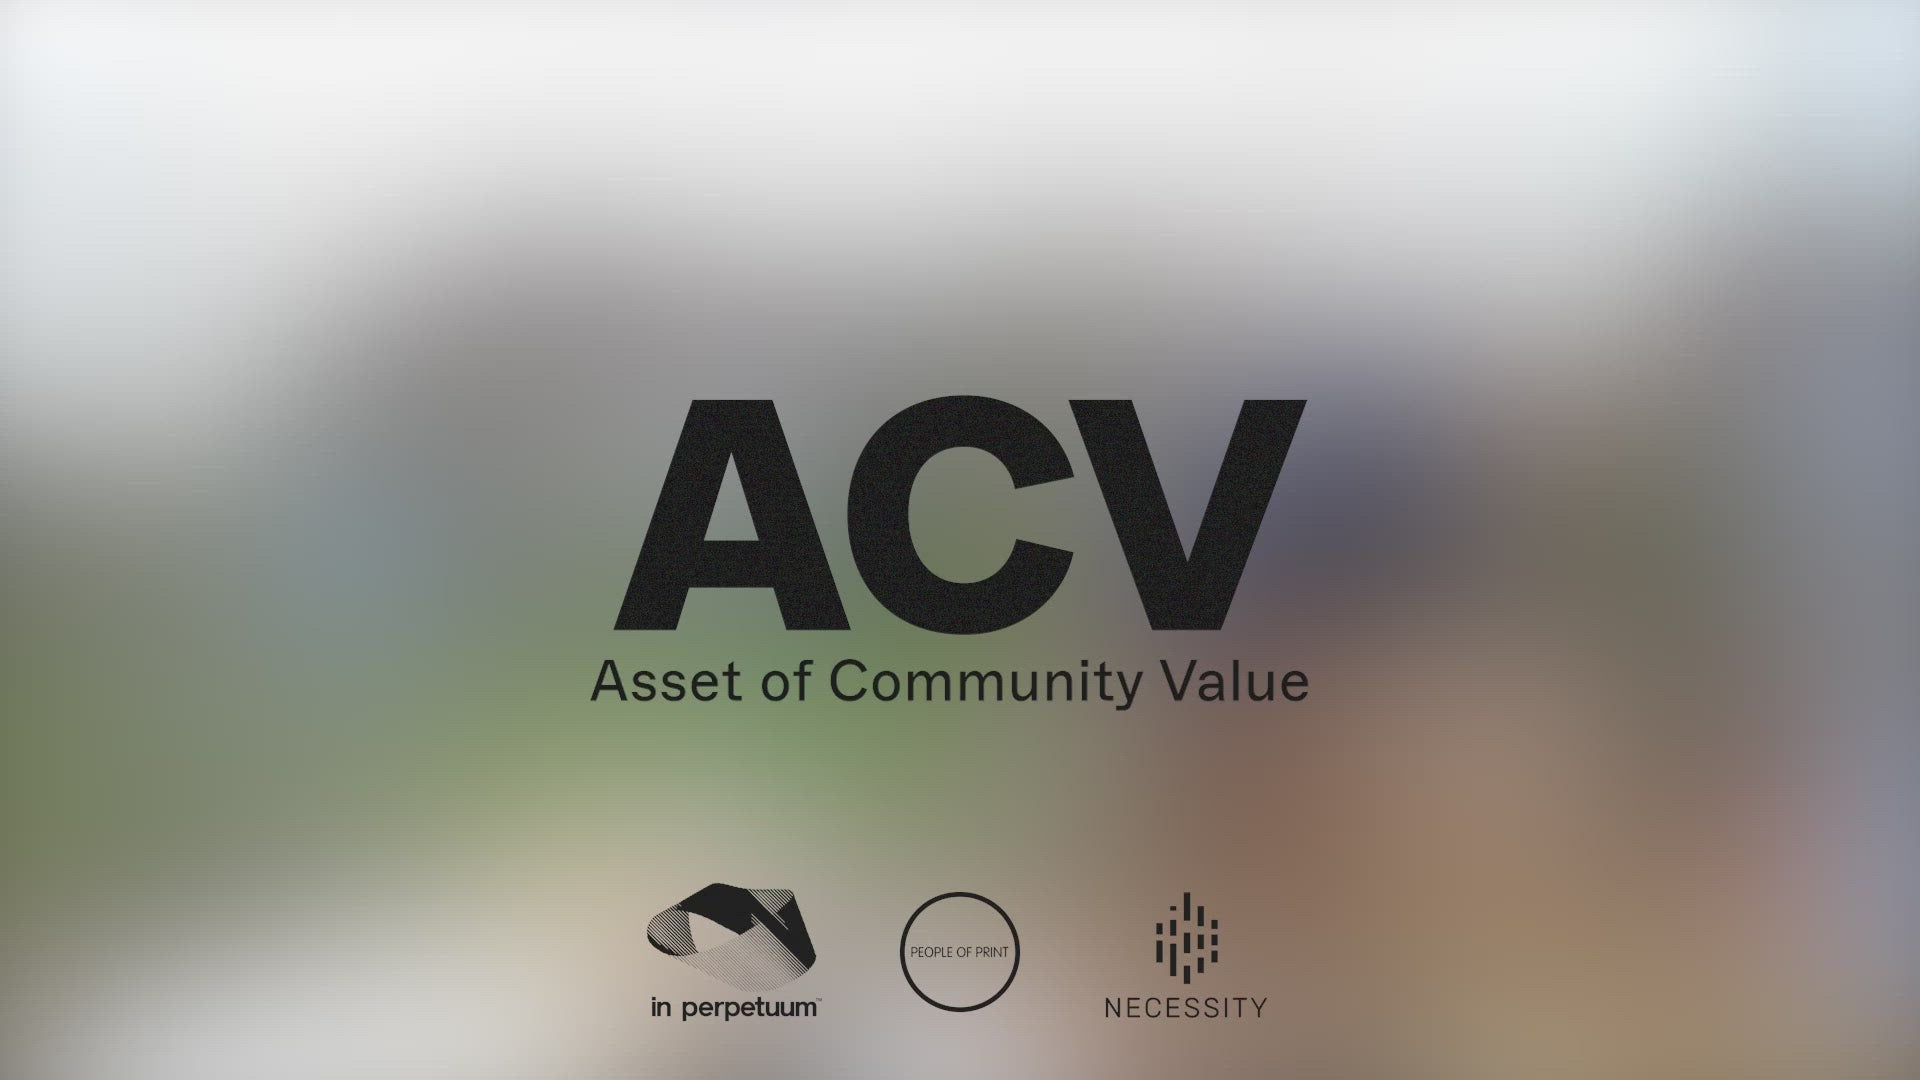 Asset of Community Value - Growth